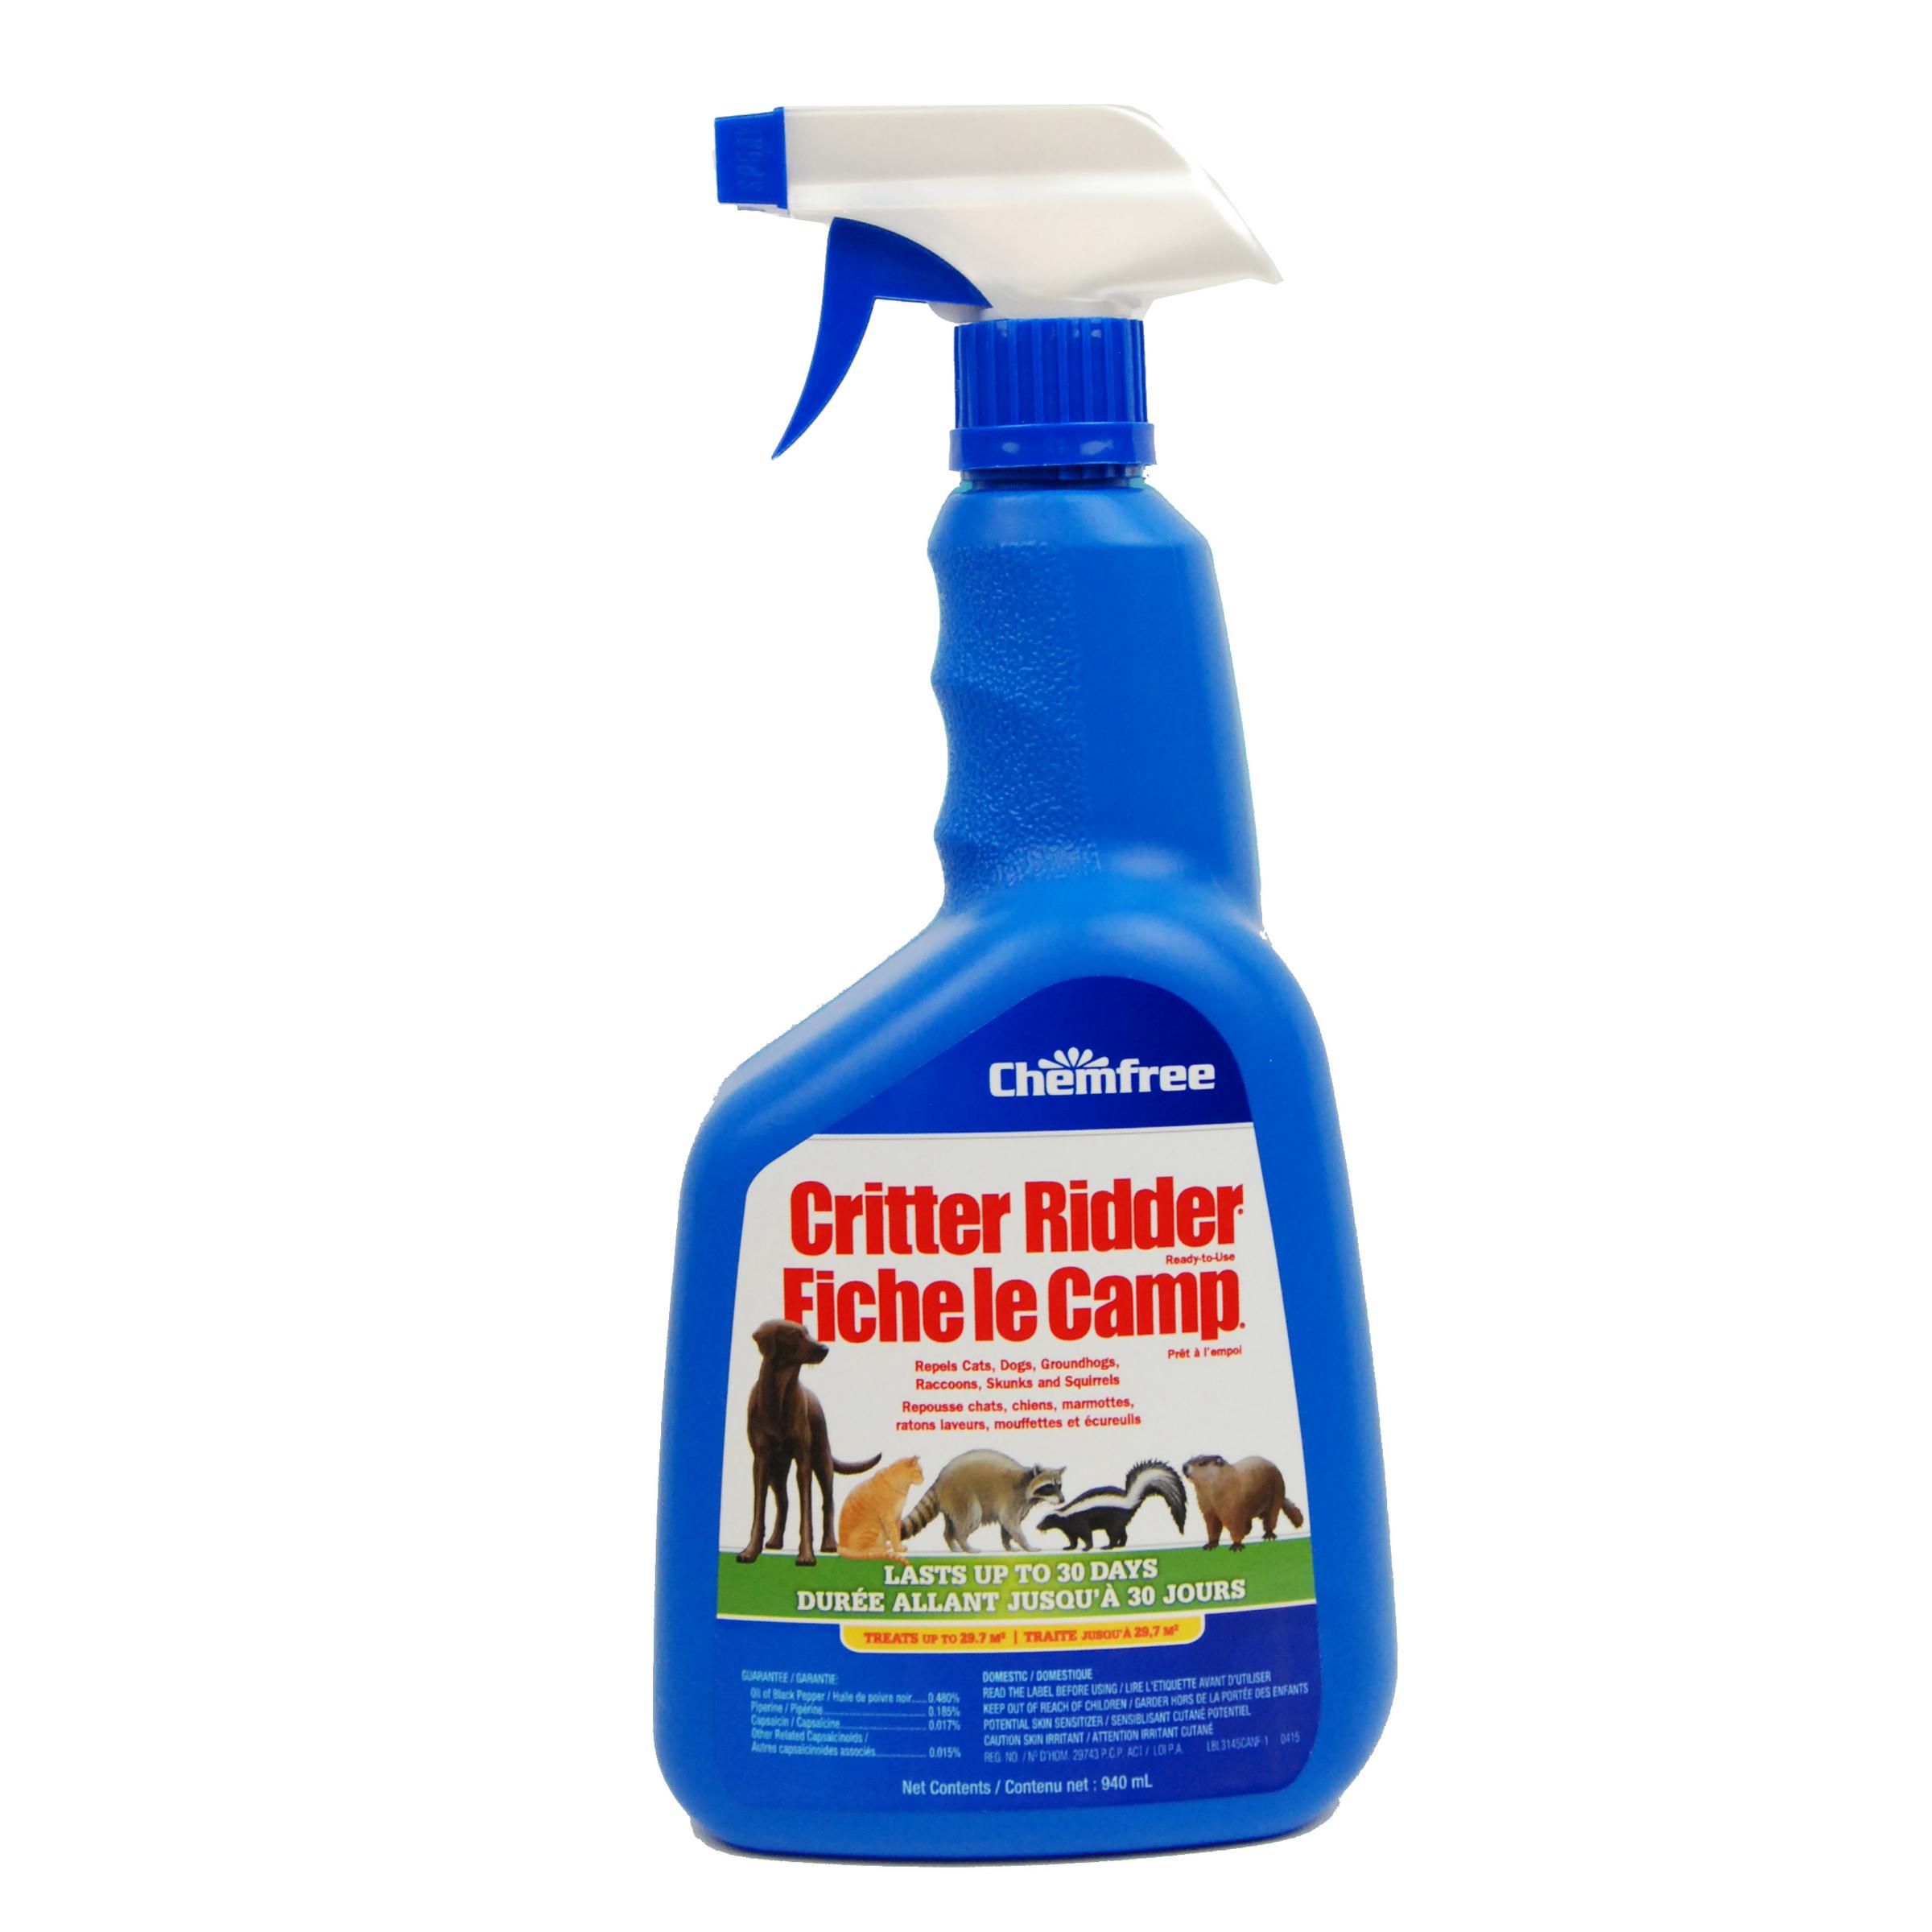 Chemfree Critter Ridder Animal Repellent Ready-to-Use Spray – 940mL ...